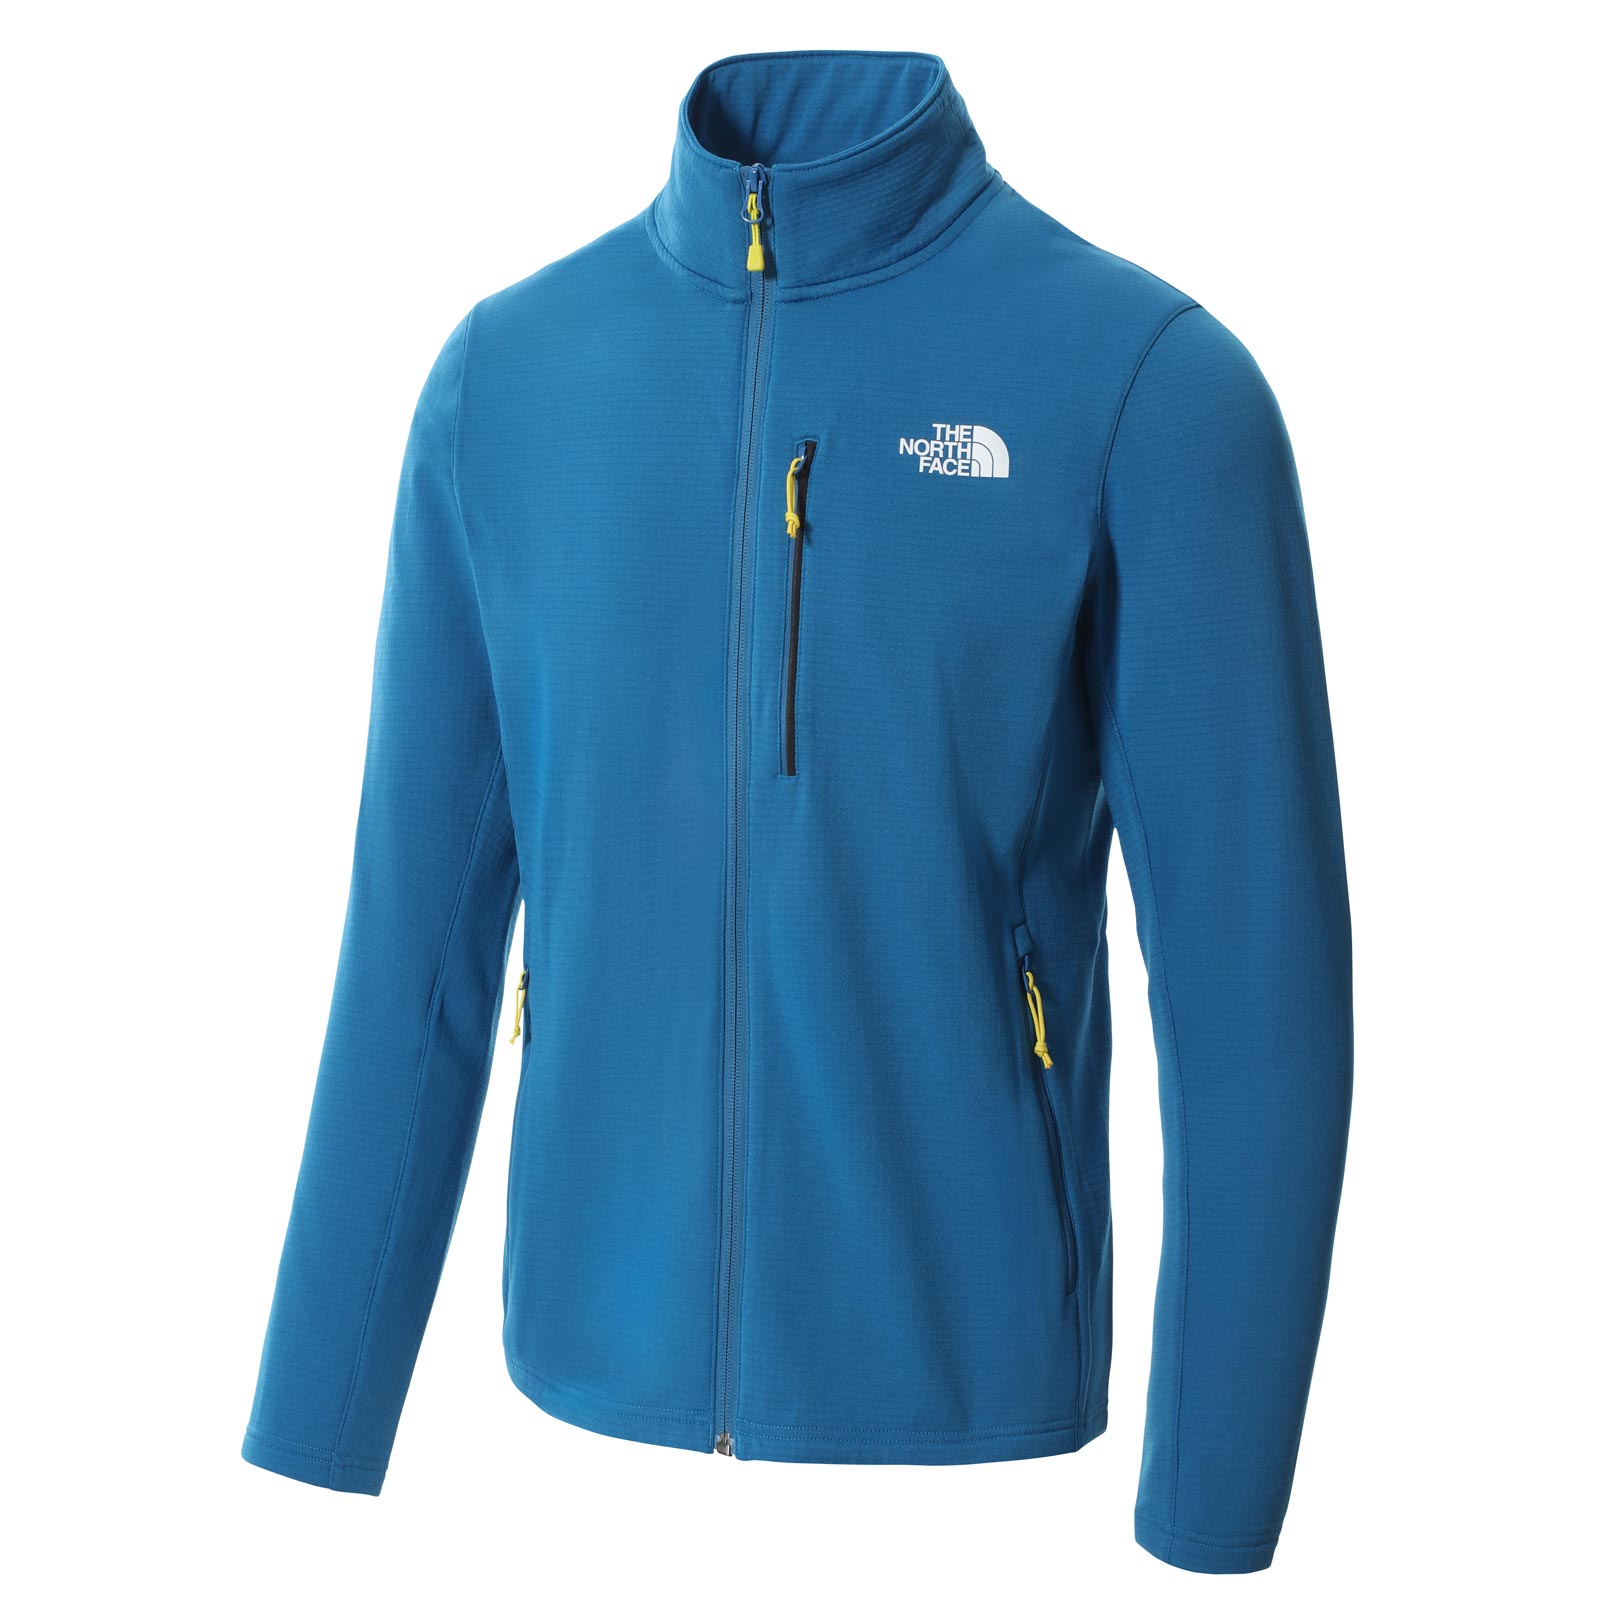 THE NORTH FACE ODLES MENS FULL-ZIP FLEECE  